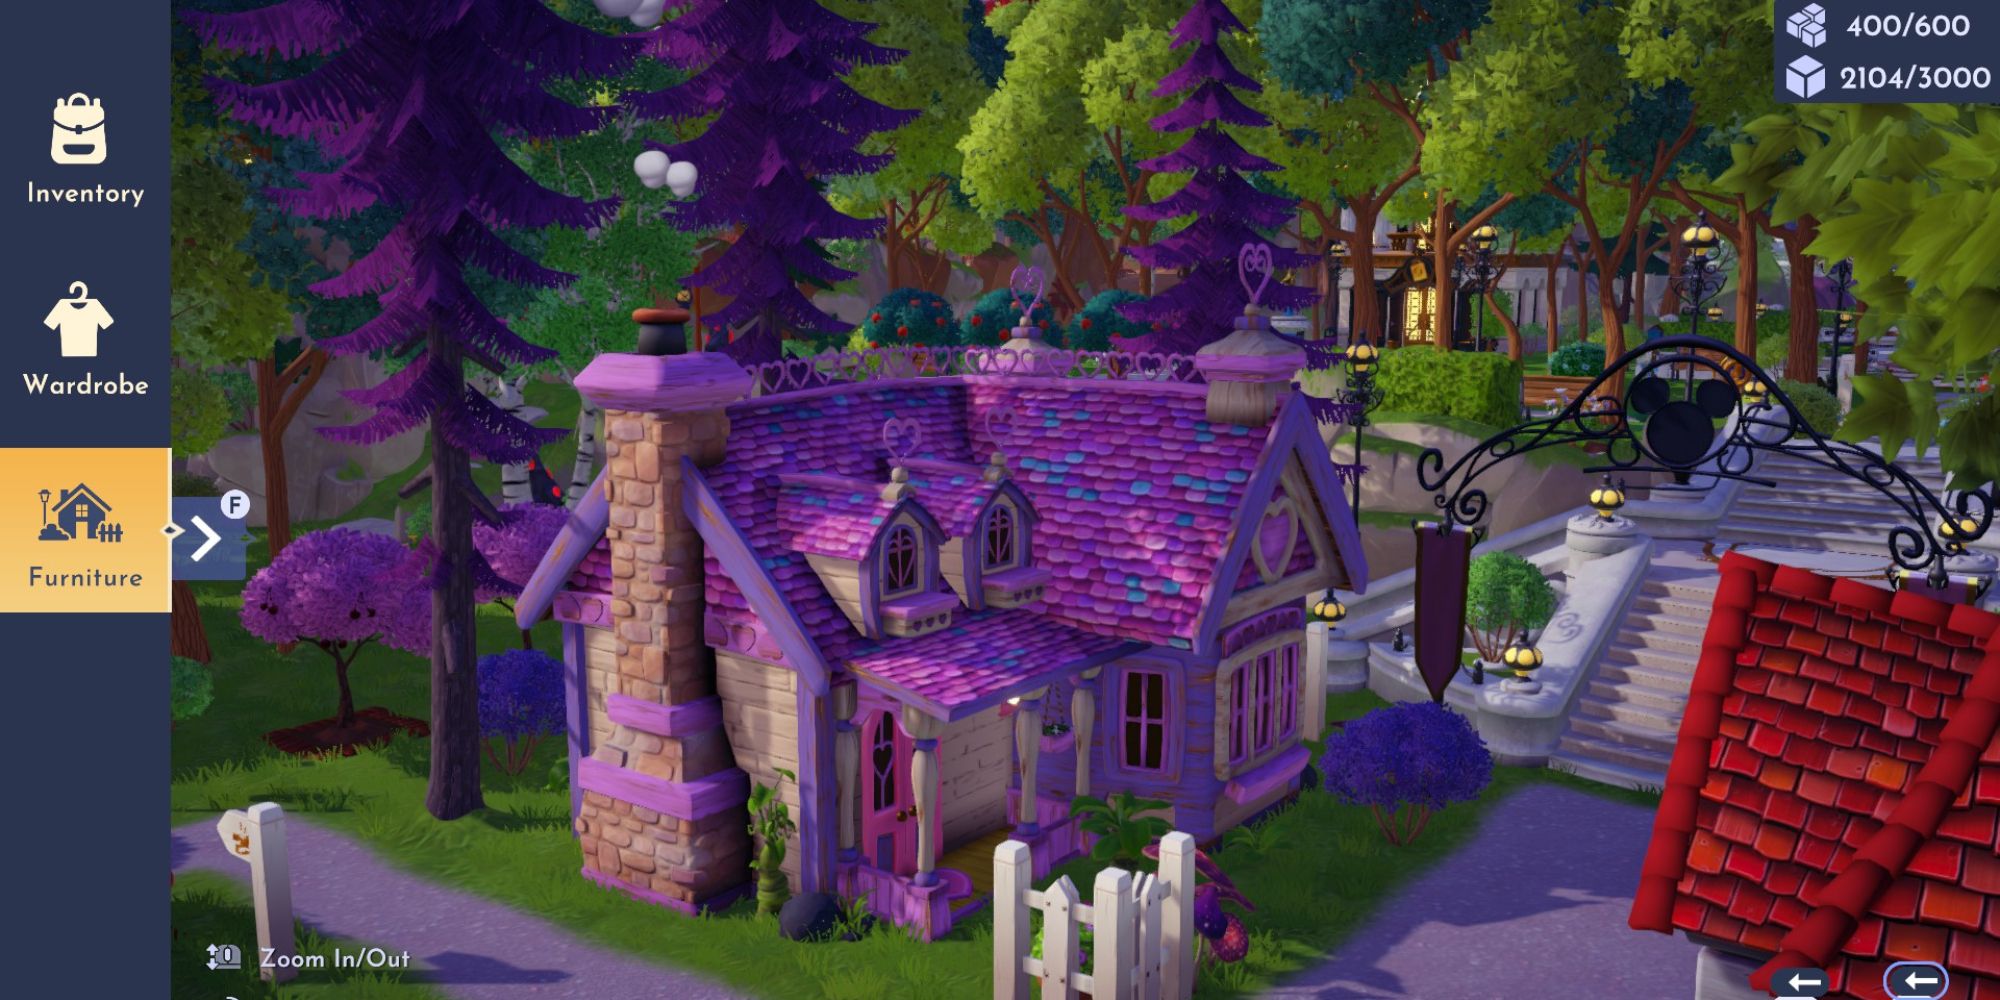 minnie mouse's house with purple trees around it